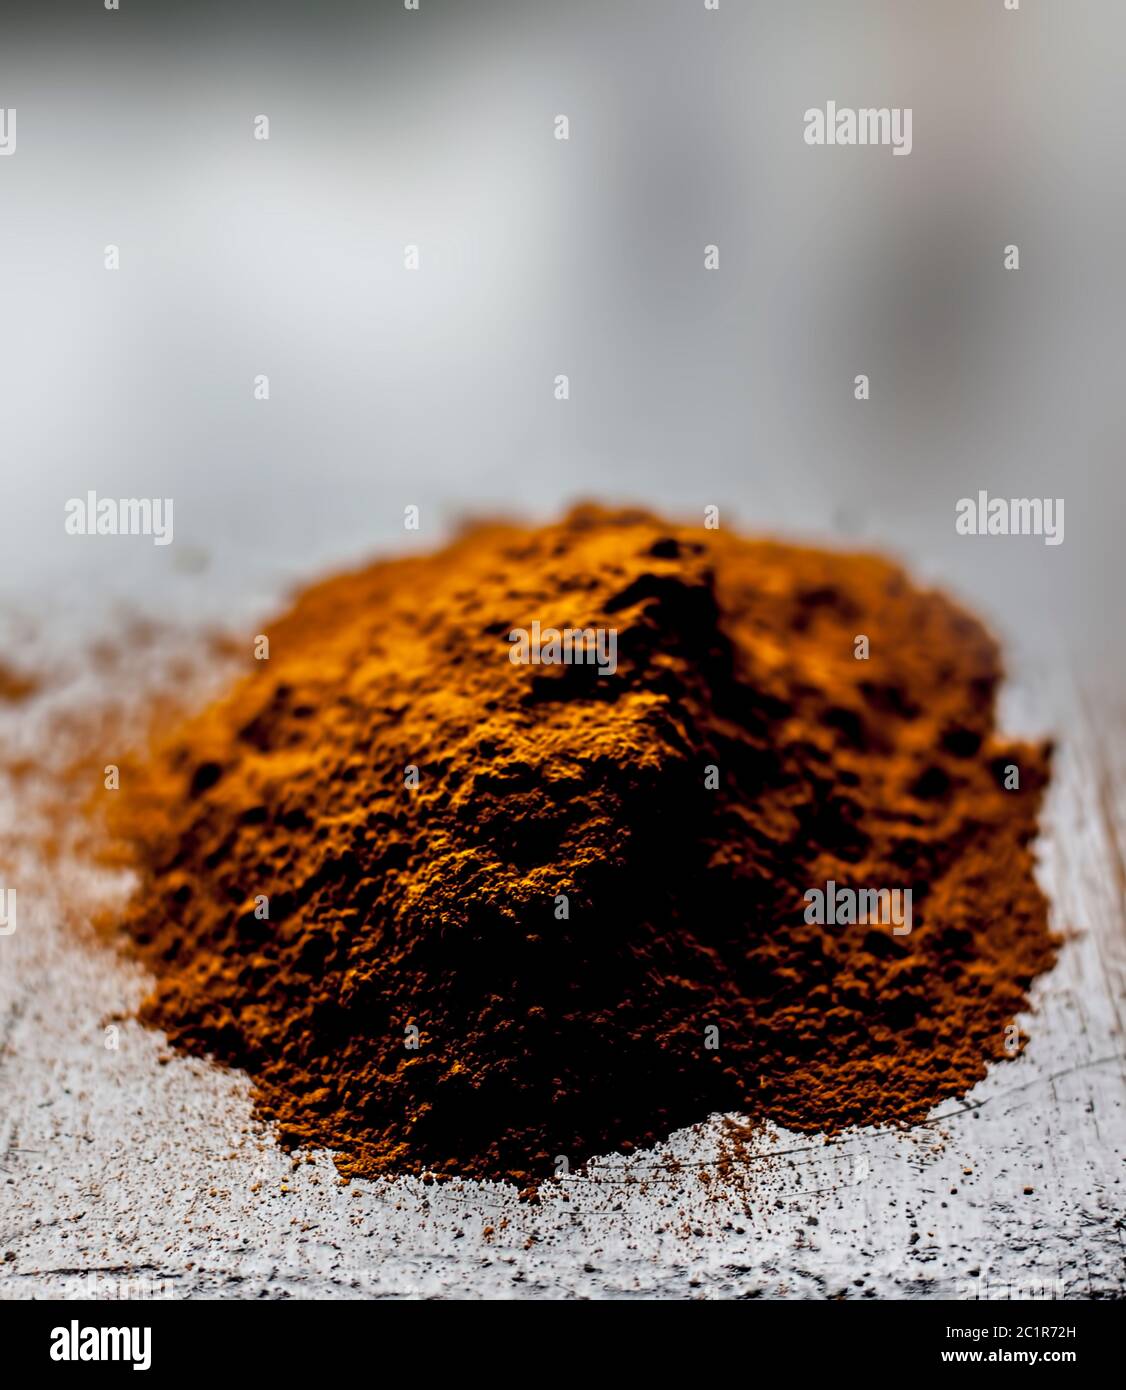 Shot of raw revand chini powder on a wooden surface. Shot in dark gothic colors. Stock Photo